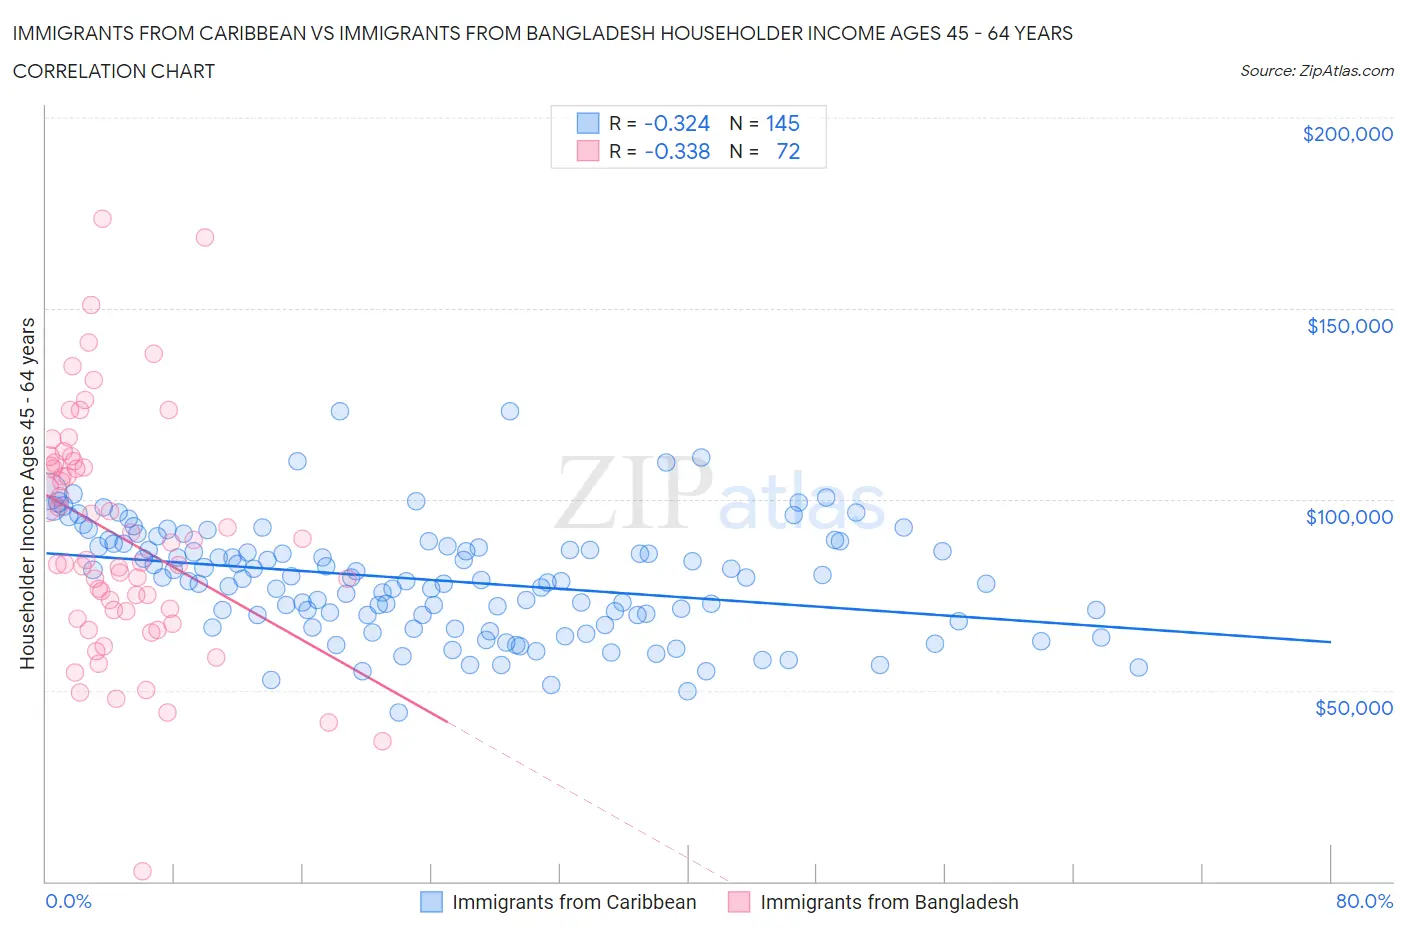 Immigrants from Caribbean vs Immigrants from Bangladesh Householder Income Ages 45 - 64 years